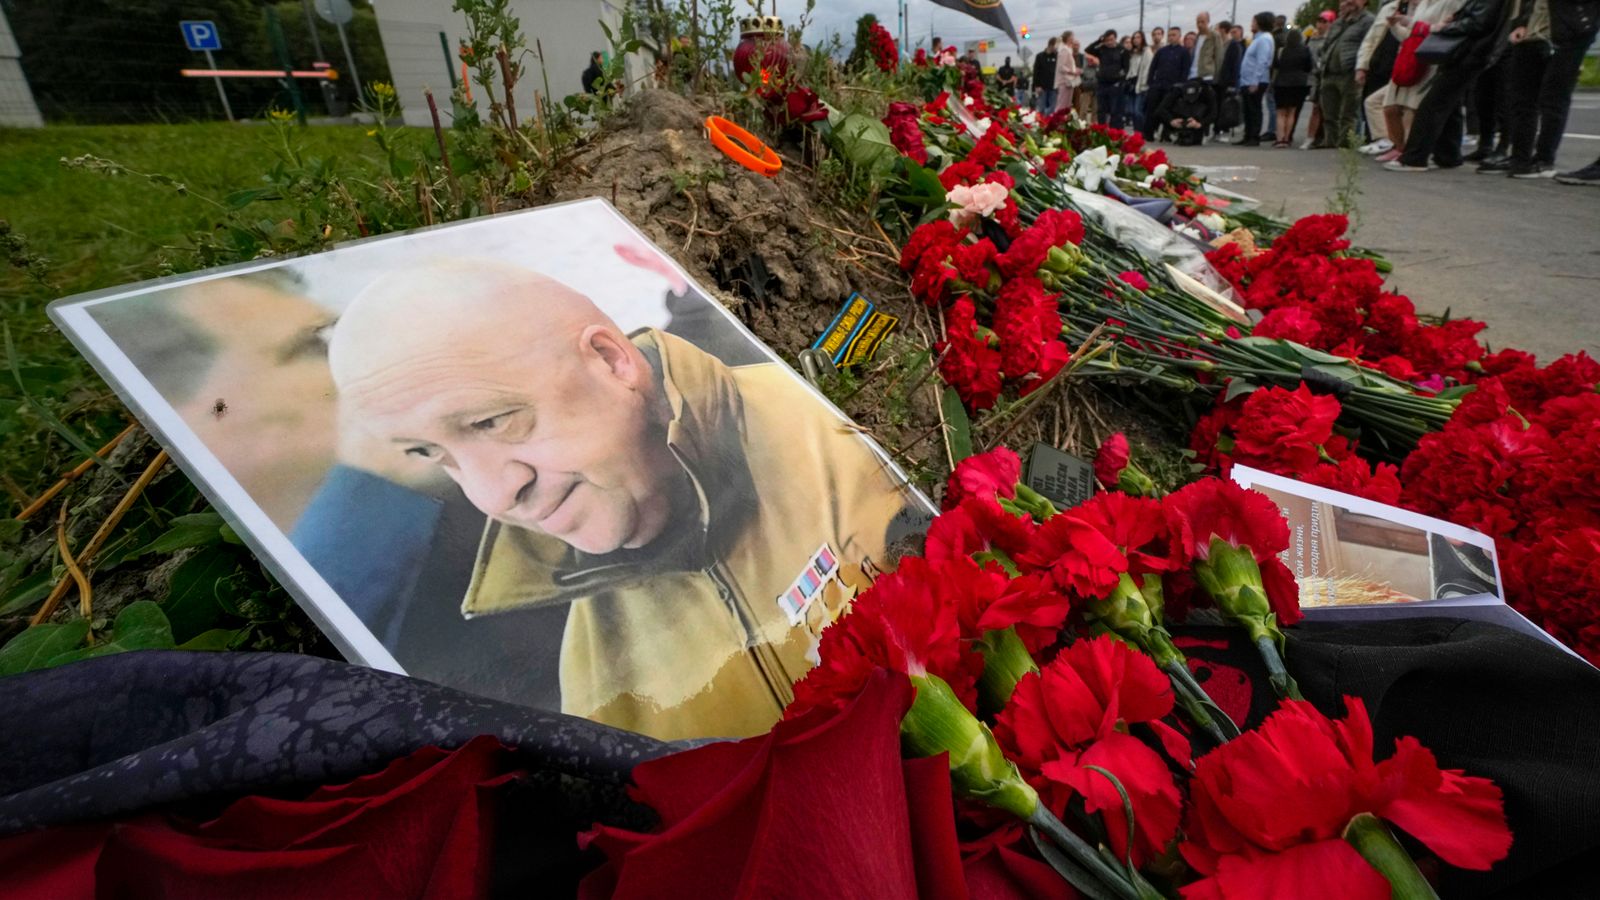 Yevgeny Prigozhin’s ‘death’ seems to reveal a Russian principle – cross the Kremlin and it won’t end well